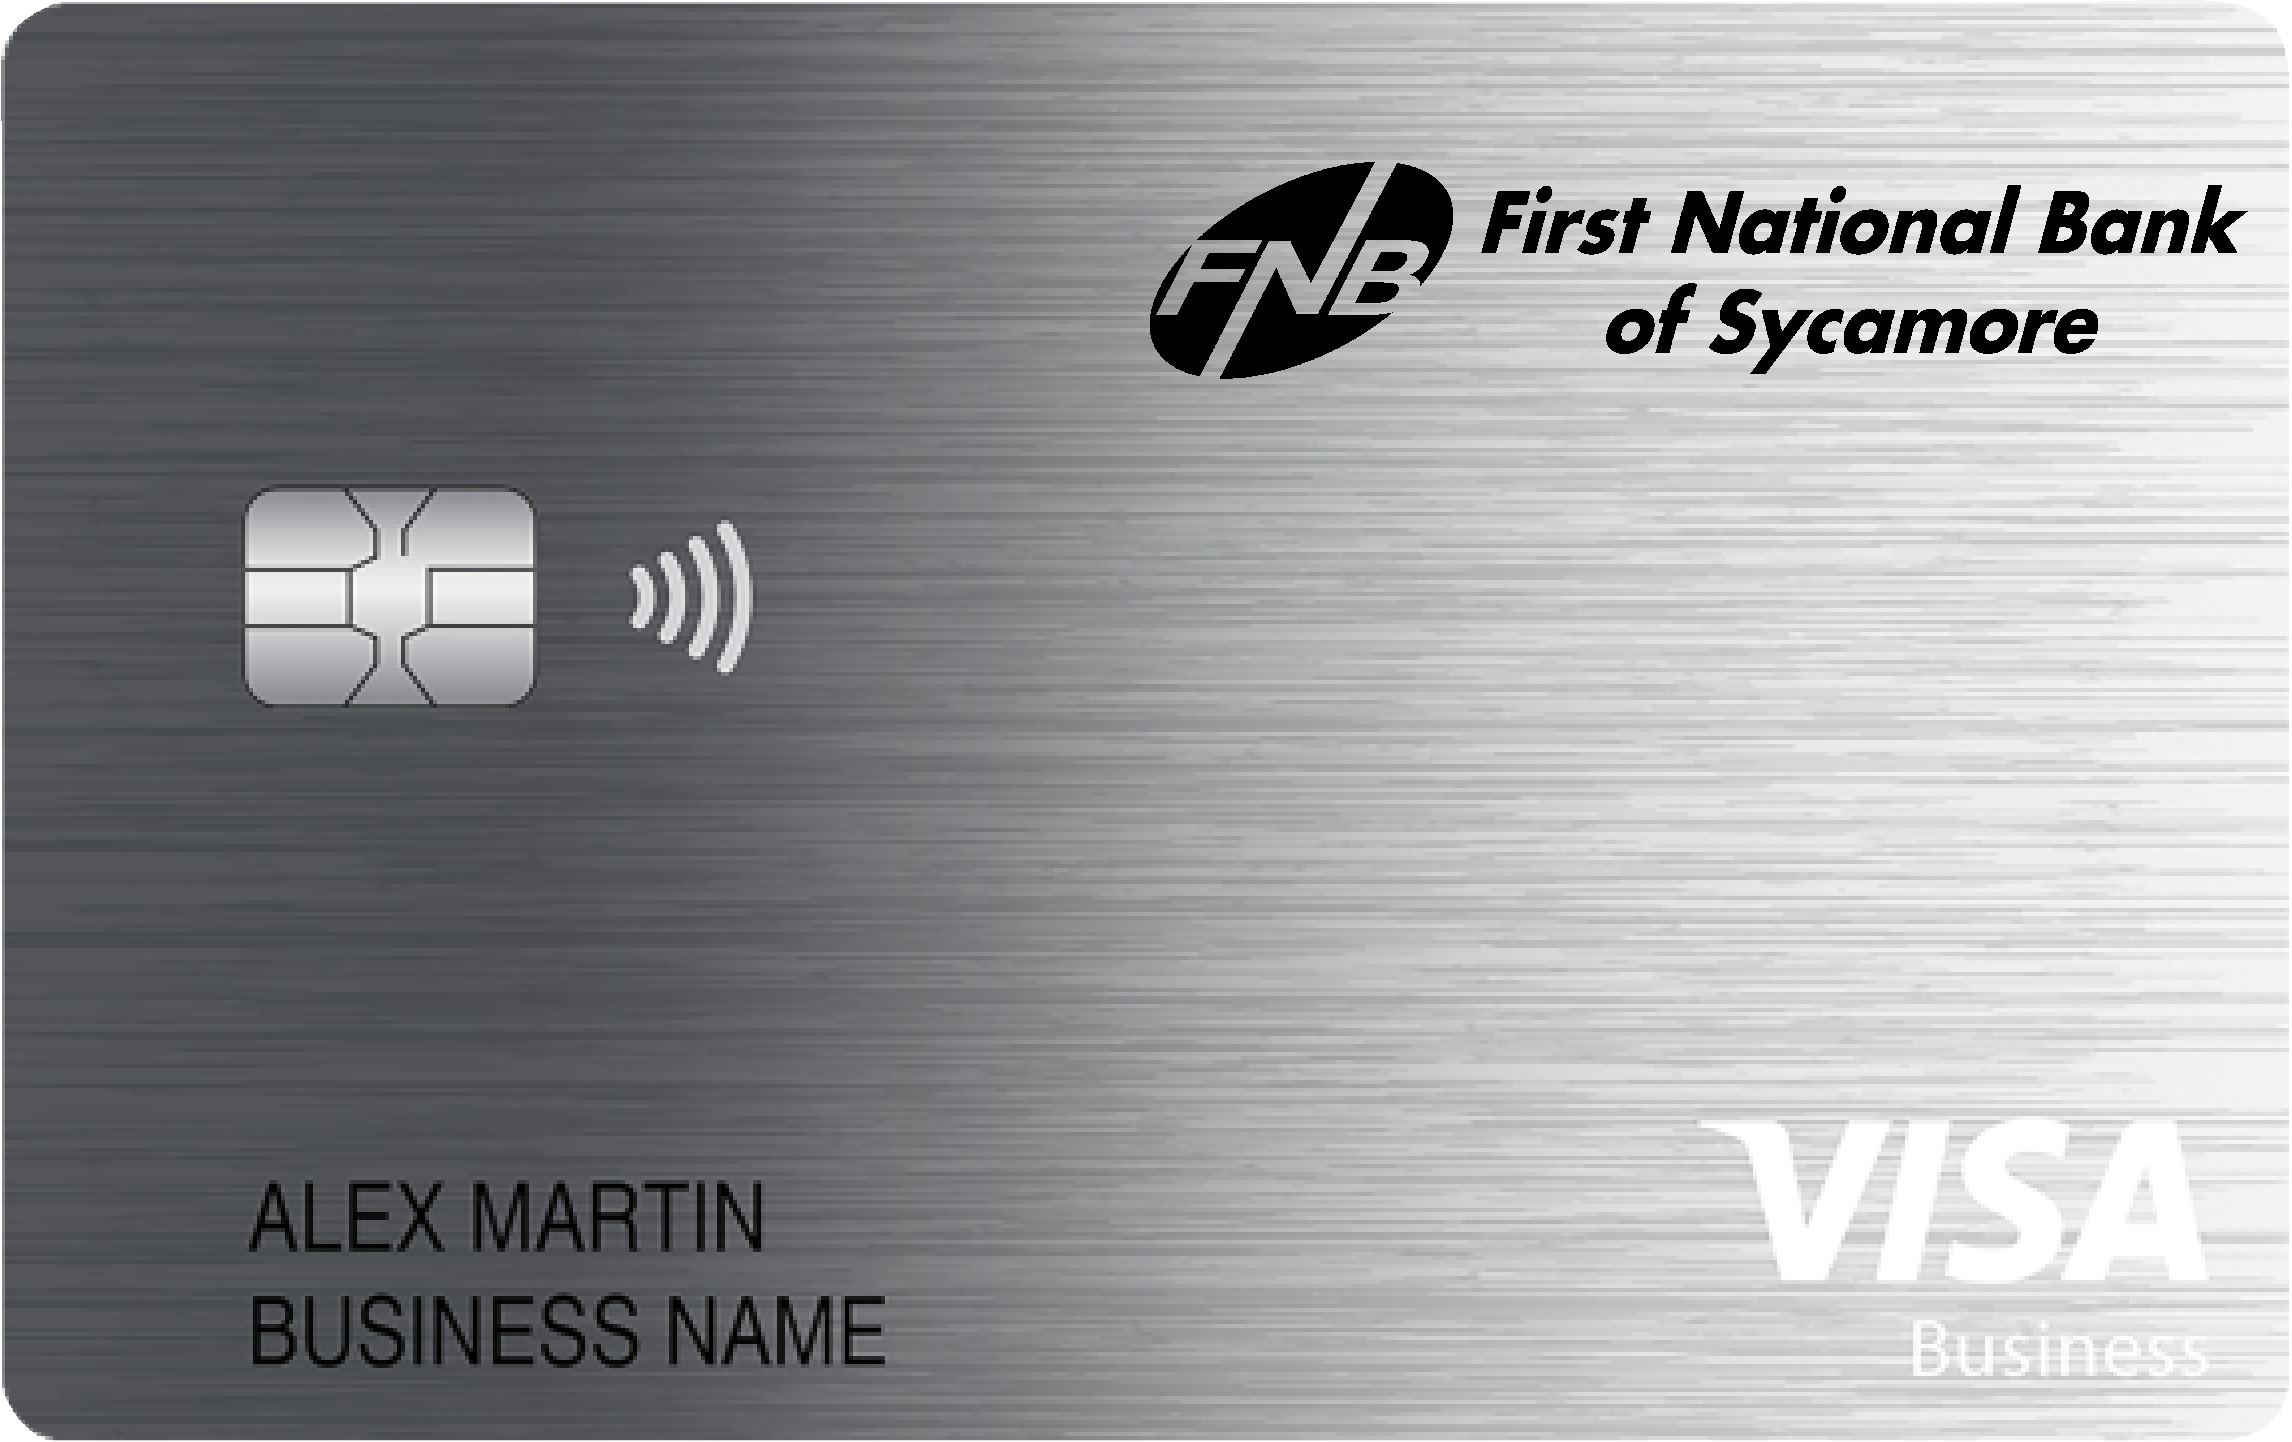 First National Bank of Sycamore Business Card Card